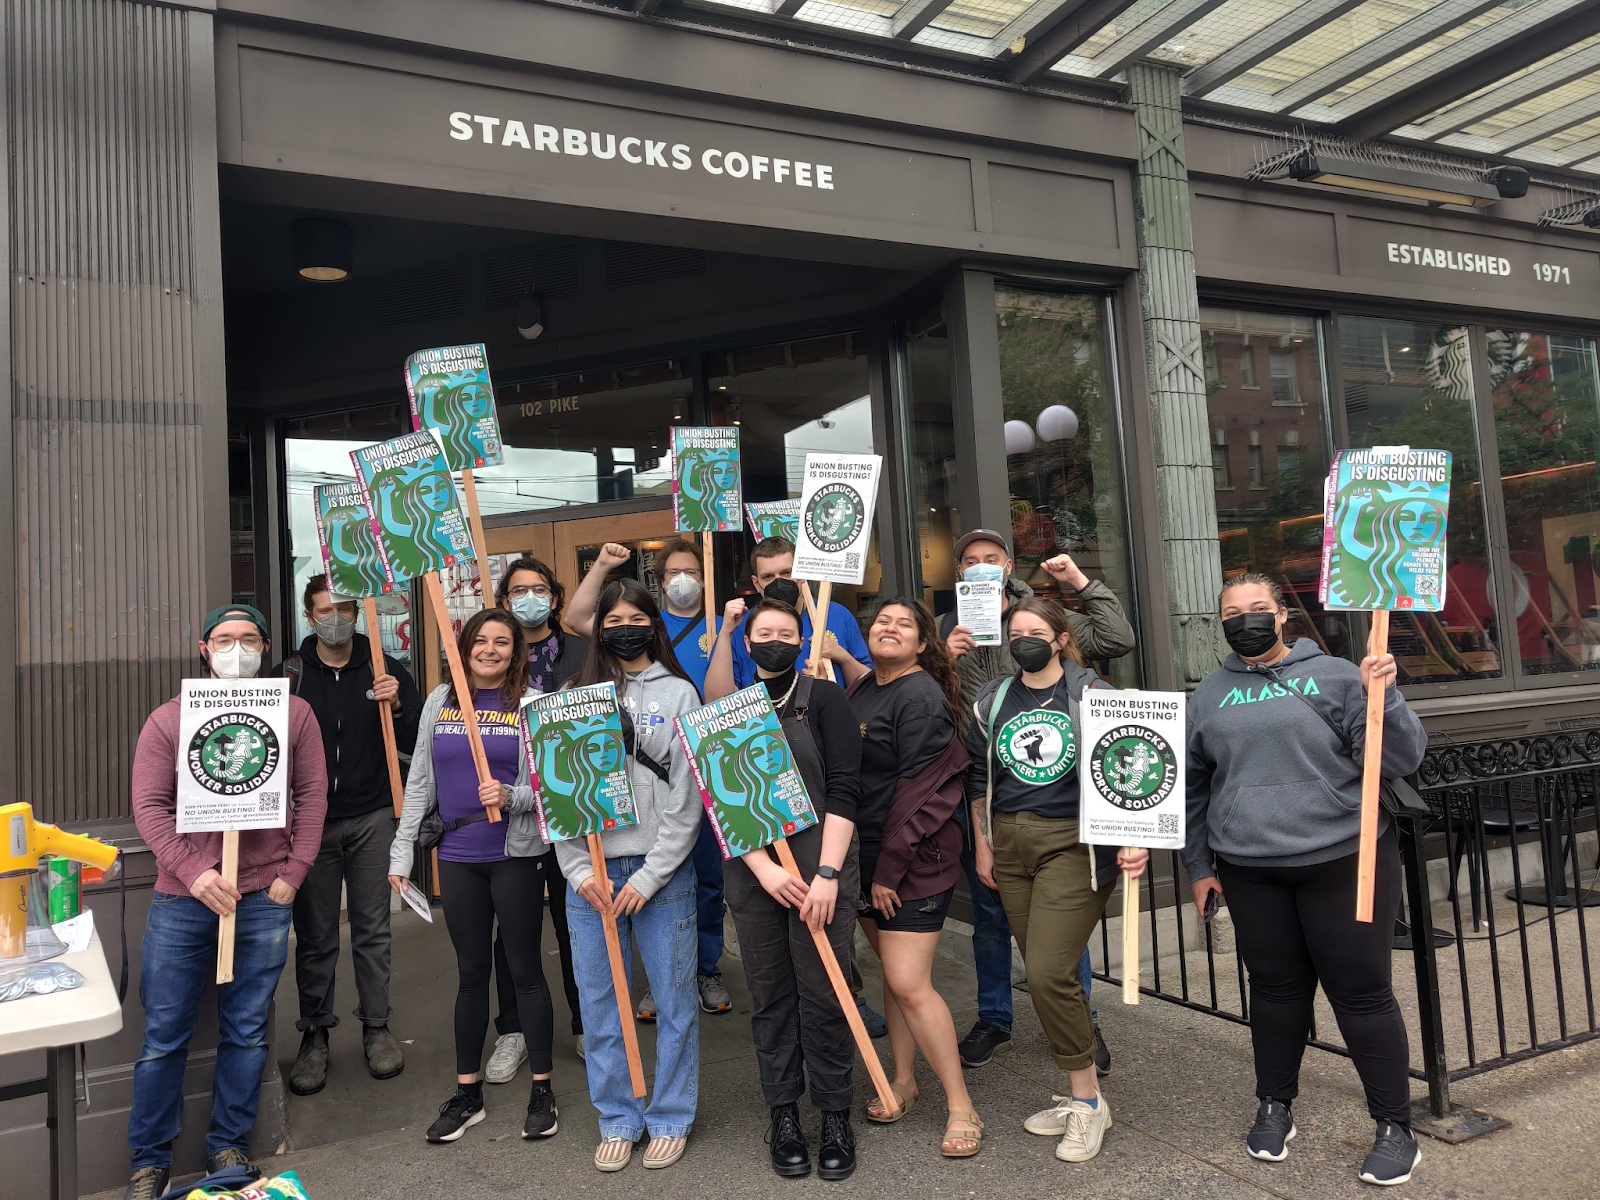 1st and Pike is on strike! Starbucks workers strike at 1st and pike, joined by community members